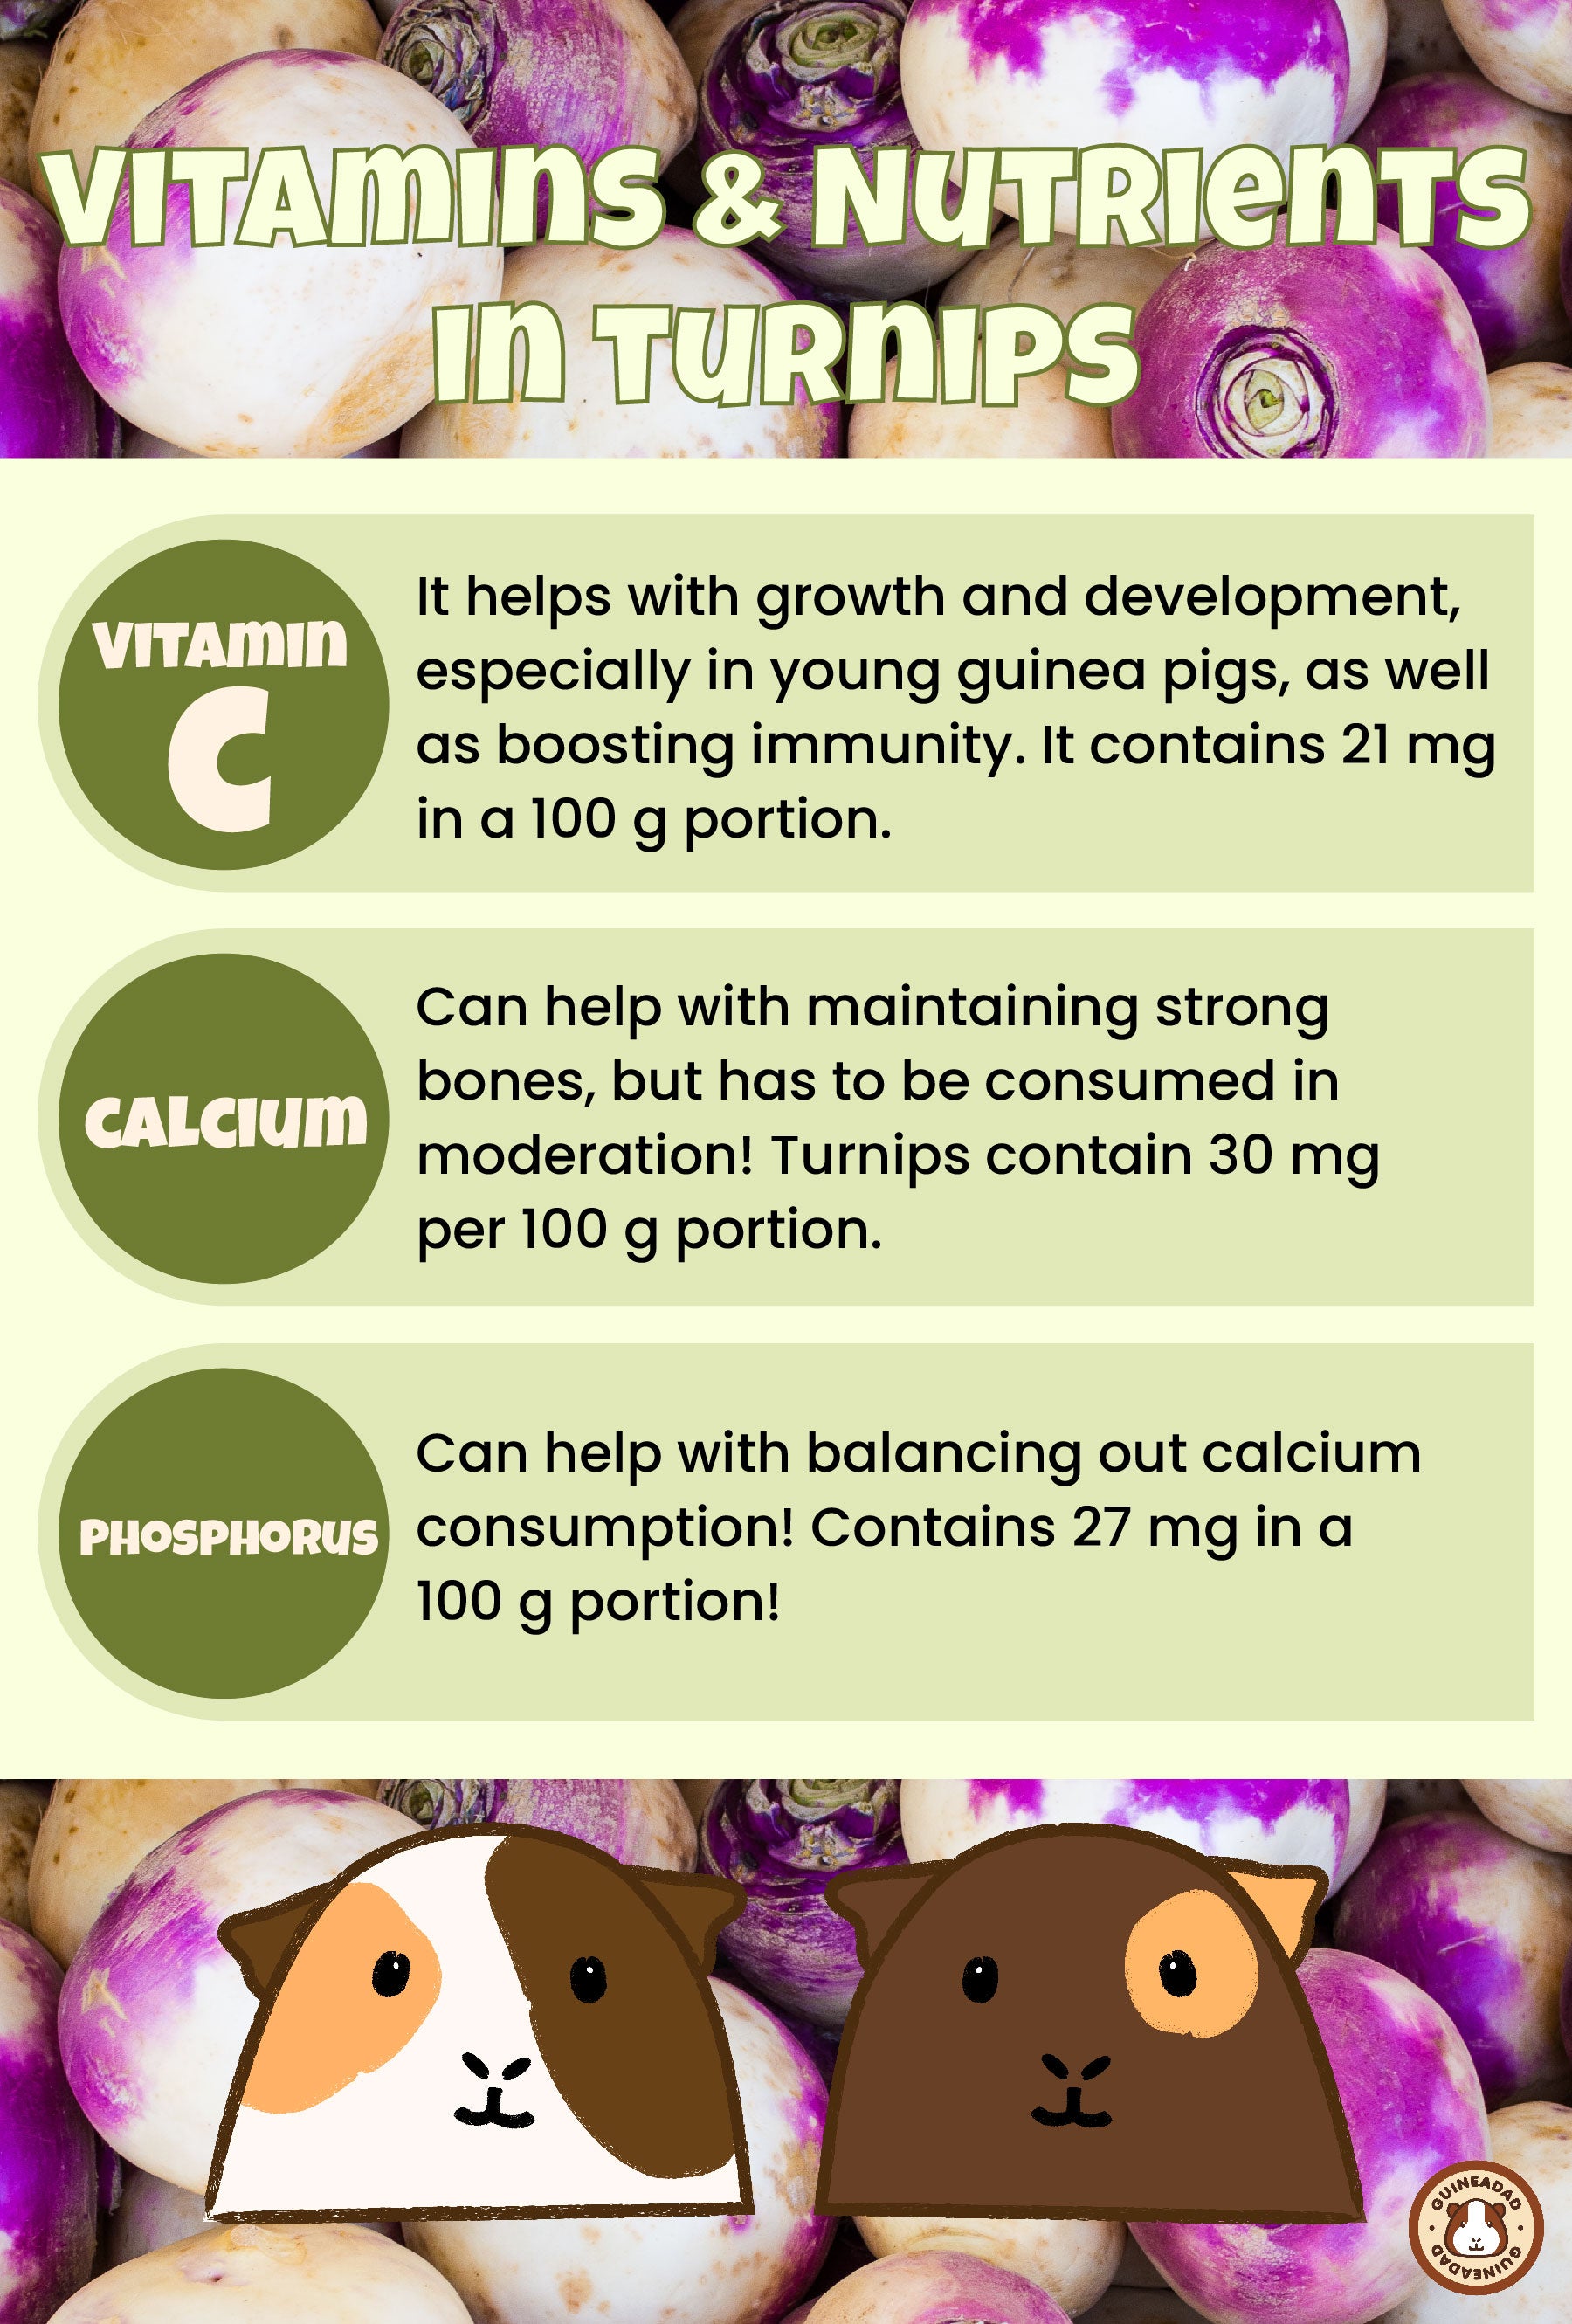 Infographic displaying the vitamins and other nutrients in turnips for guinea pigs